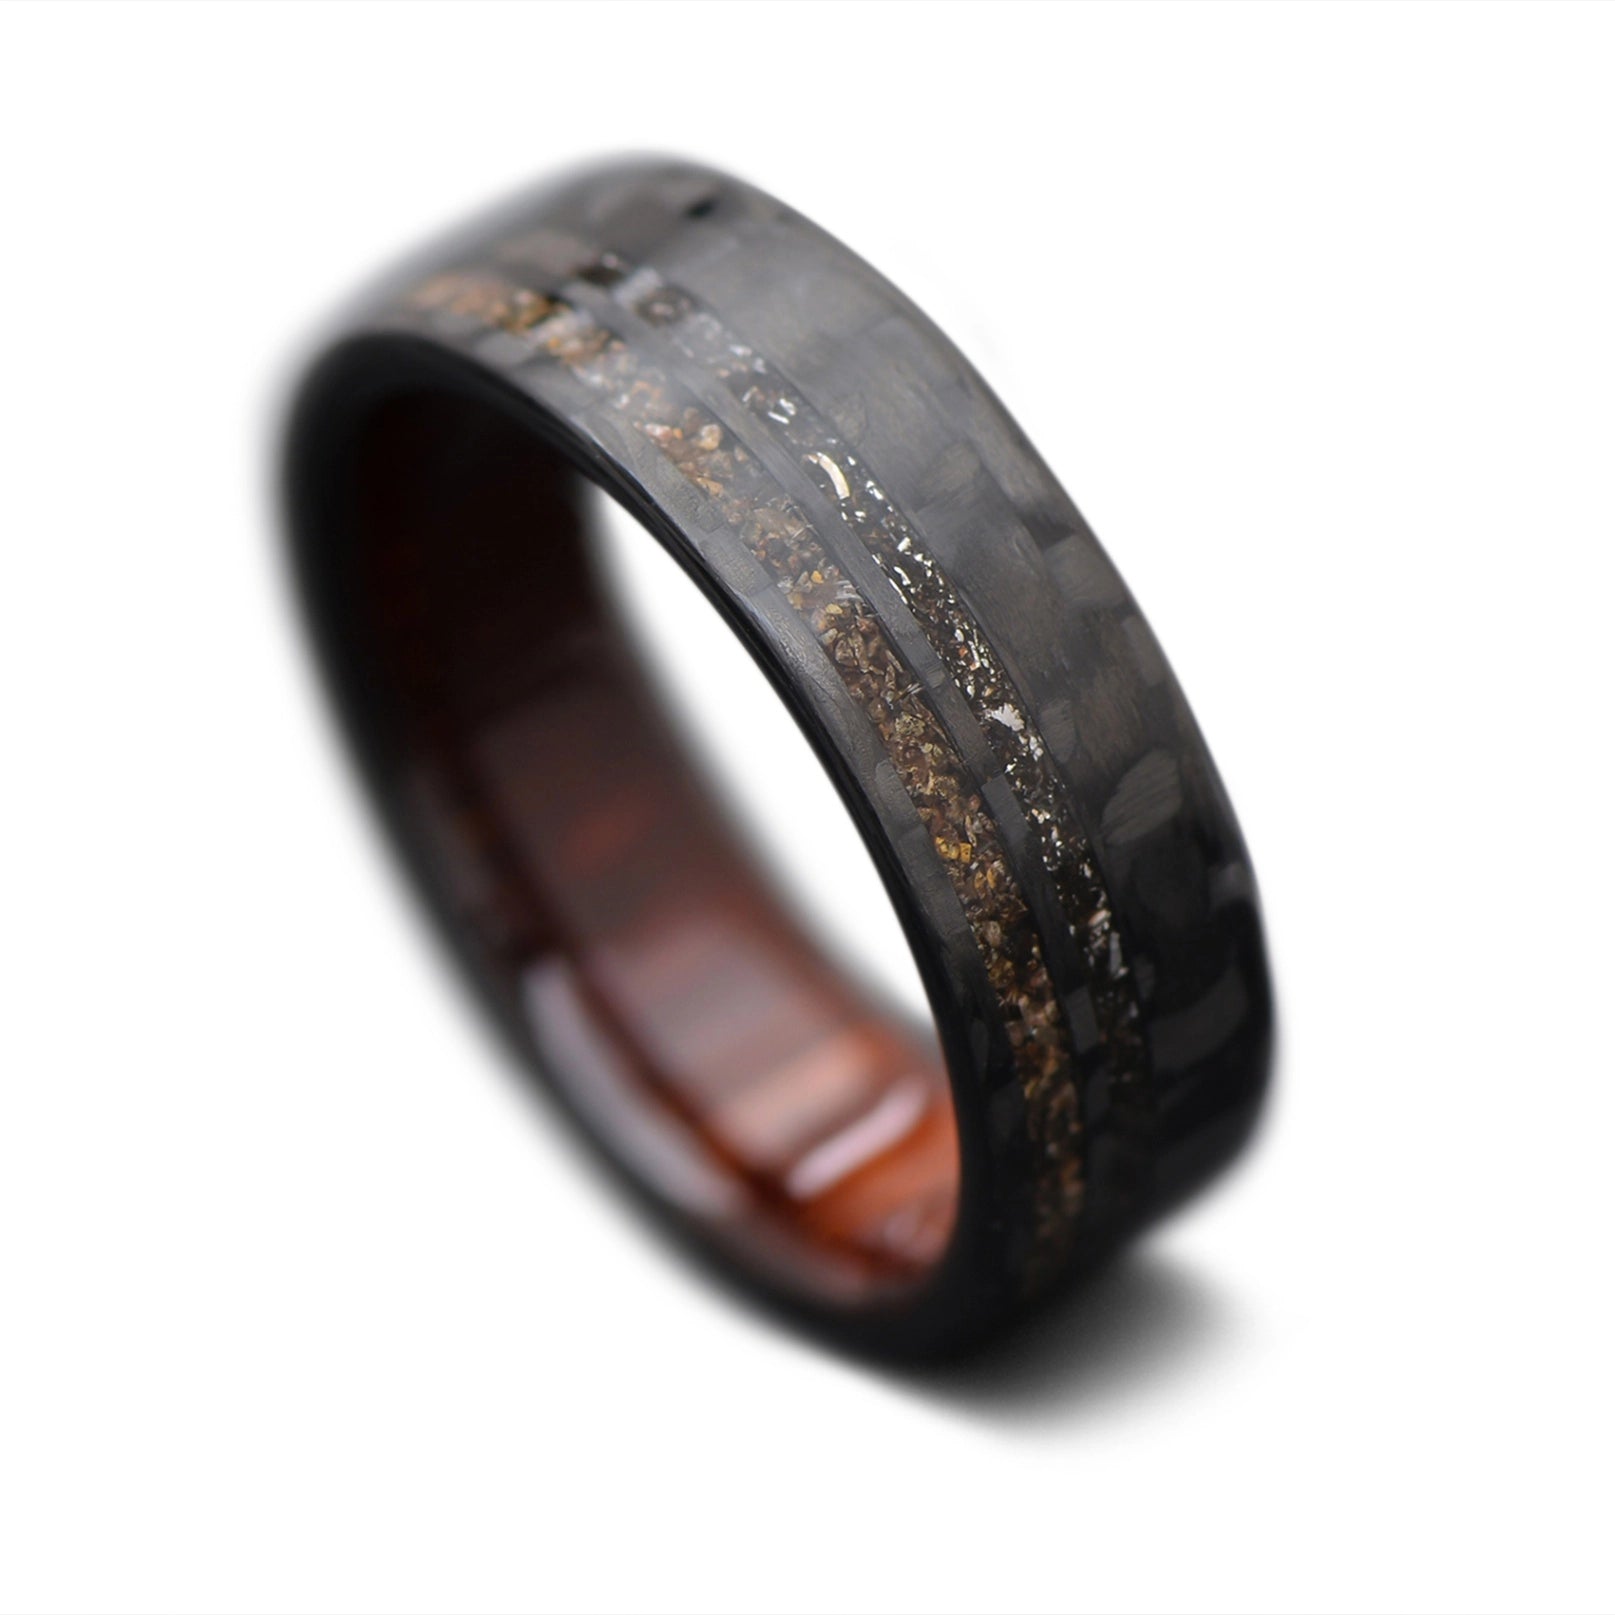  CarbonTwill Core Ring with  Crushed T-Rex, Meteorite inlay and Koa inner sleeve, 8mm -THE SEEKER